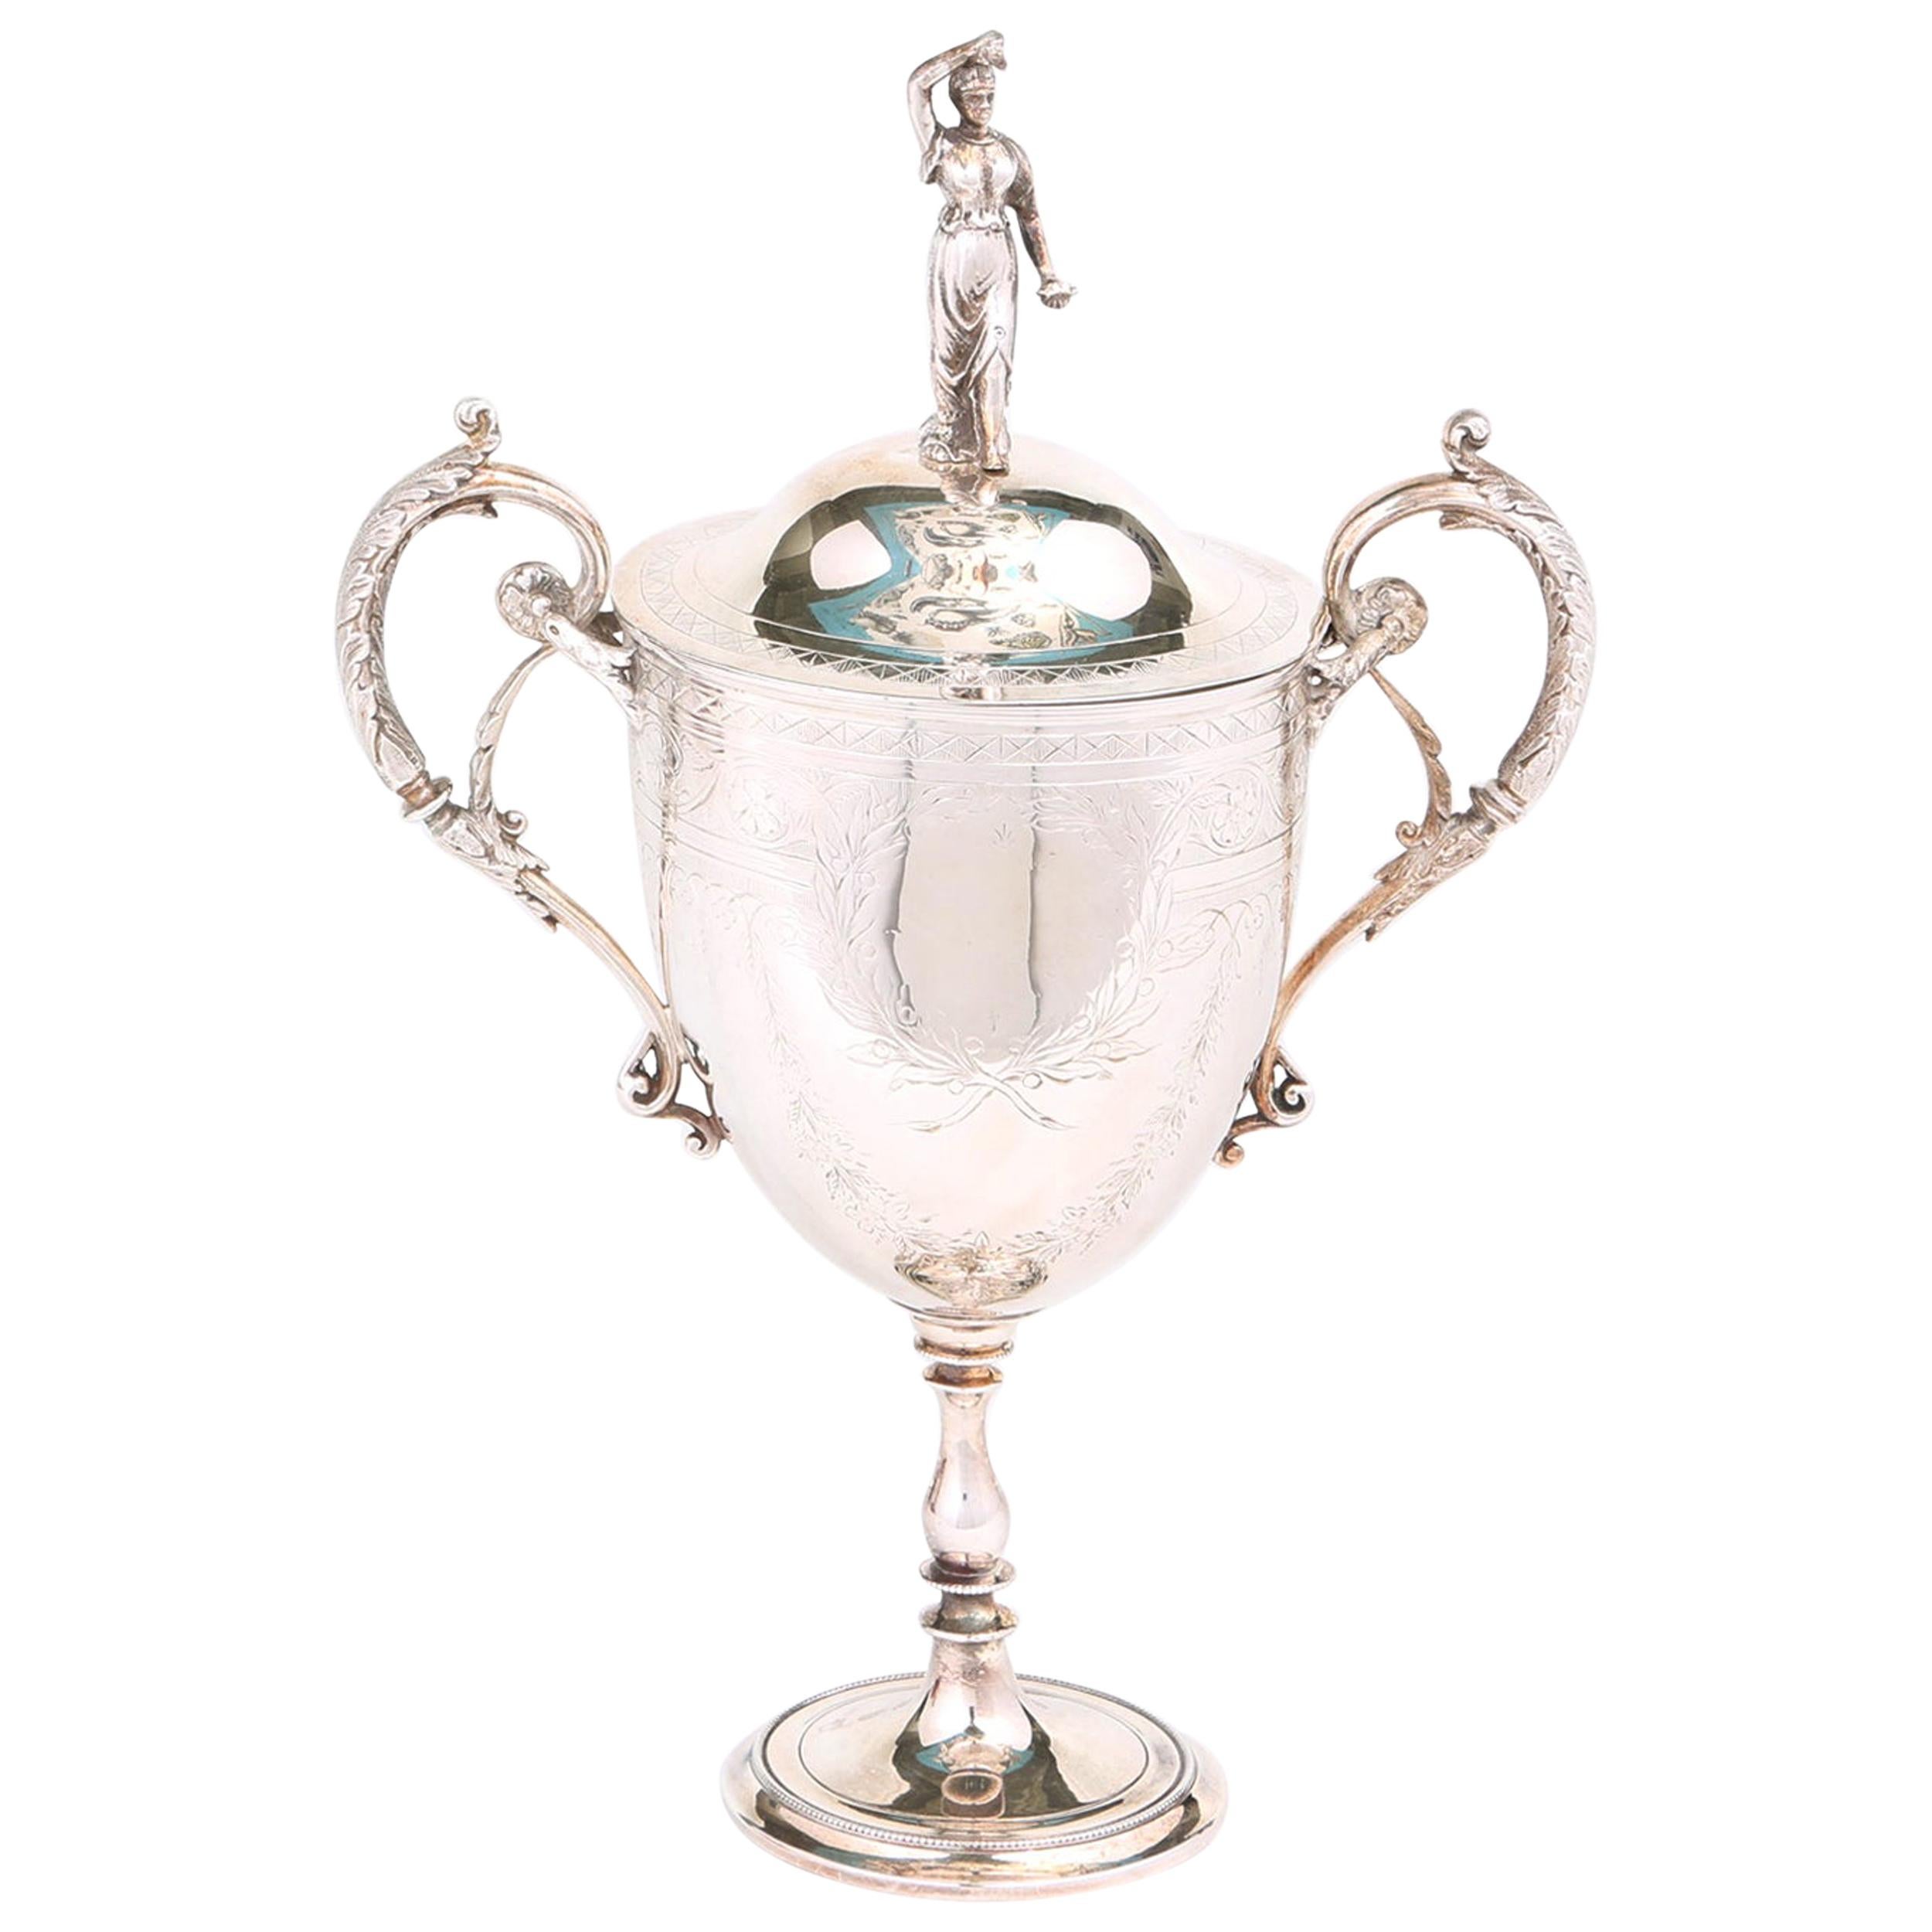 Old English Silver Plated Covered Urn